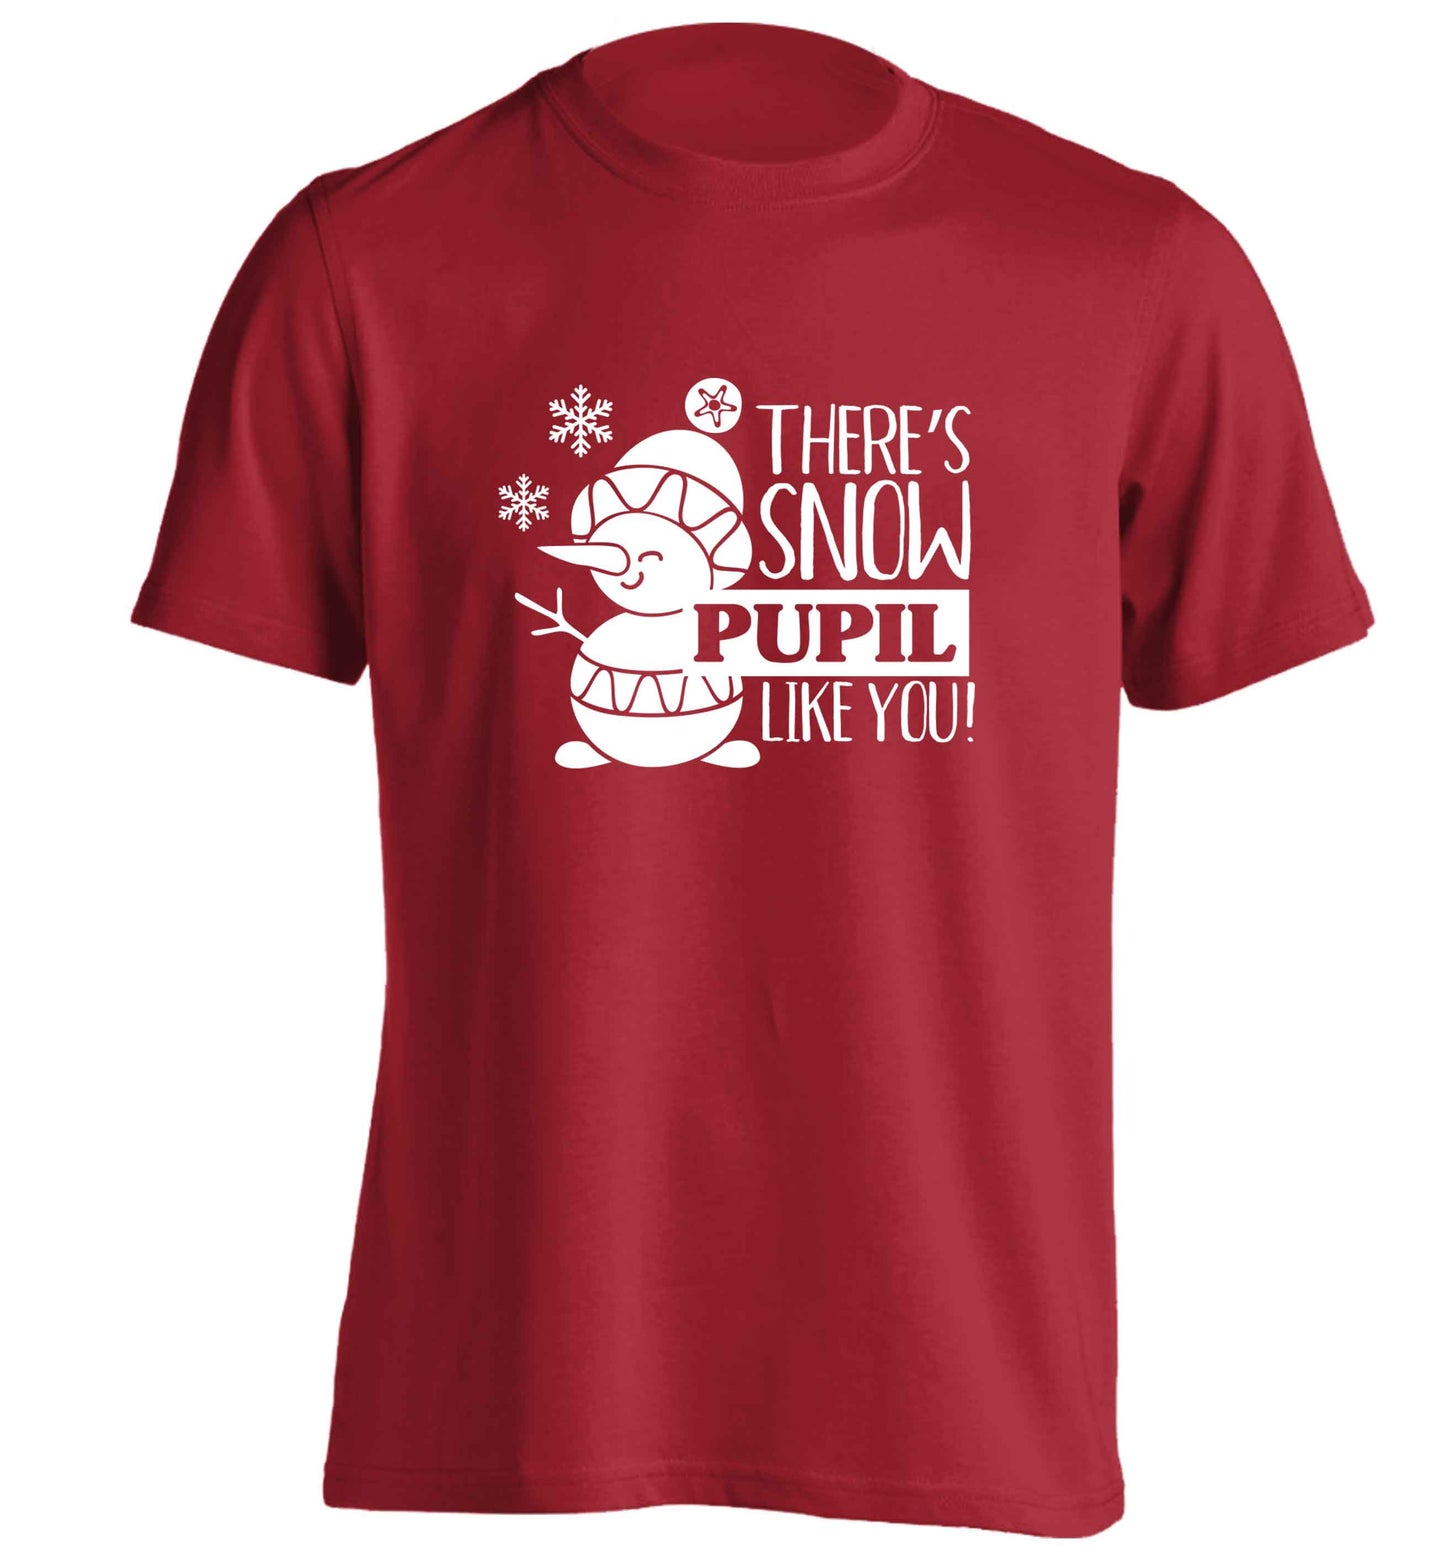 There's snow pupil like you adults unisex red Tshirt 2XL